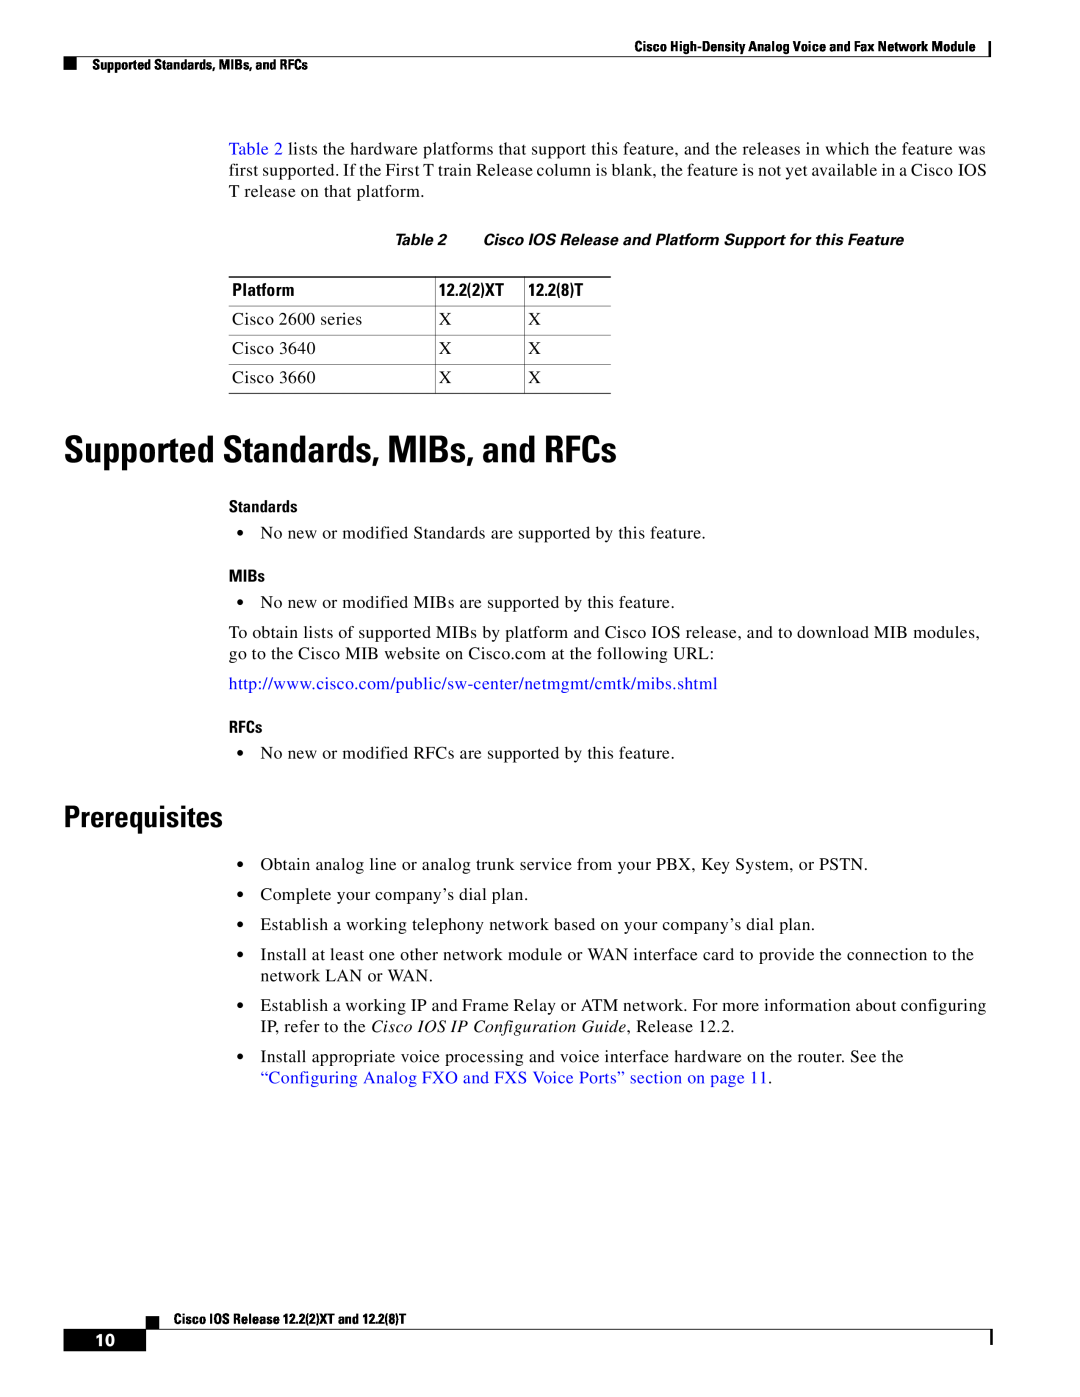 Weed Eater 2600 manual Supported Standards, MIBs, and RFCs, Prerequisites, Platform, 12.22XT, 12.28T 